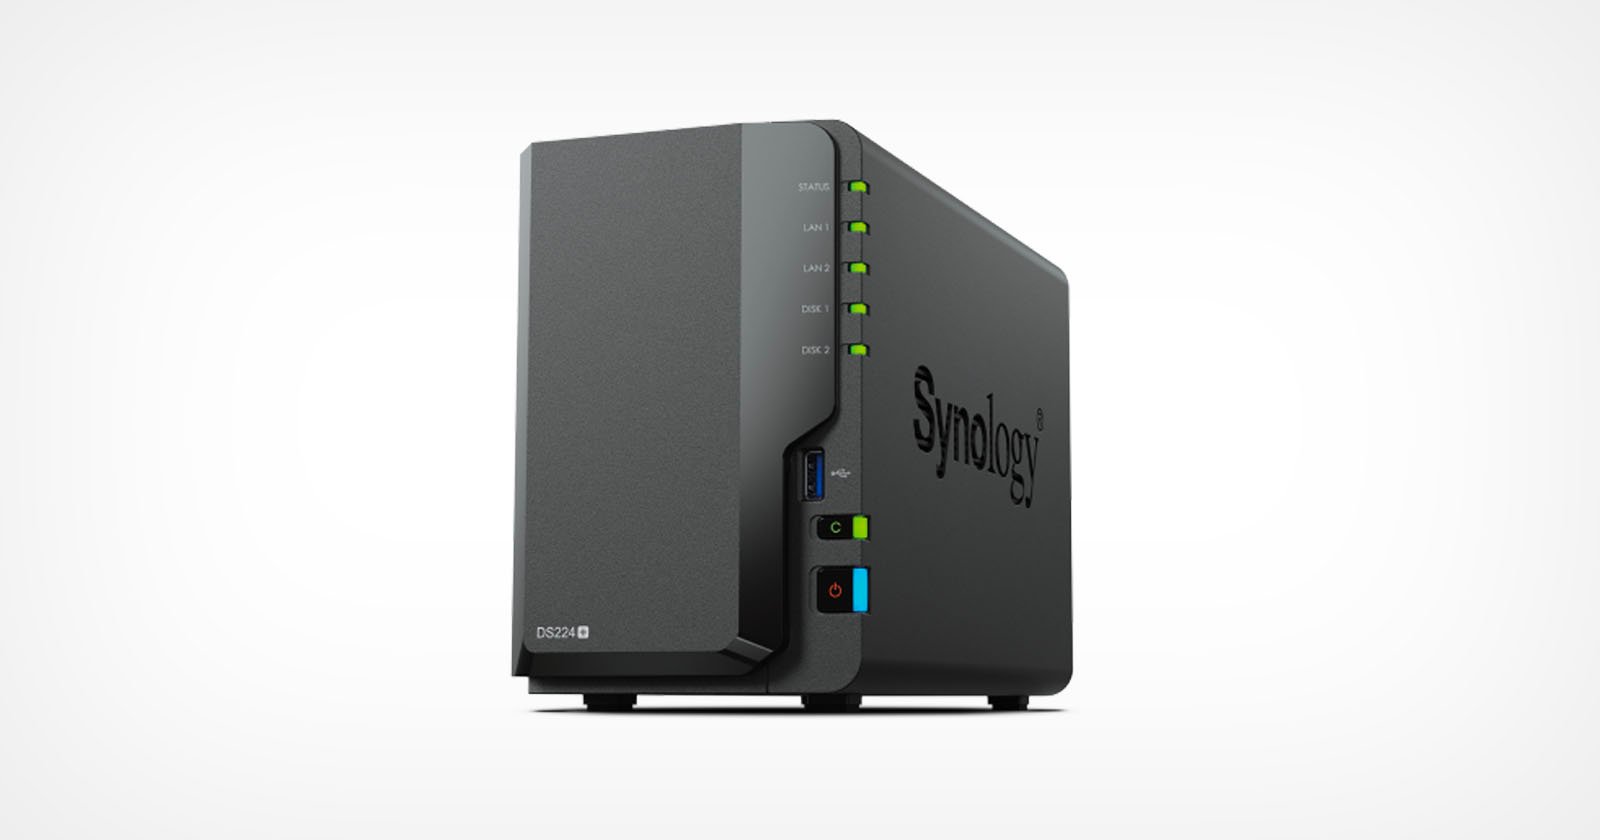  synology ds224 nas upgrades its popular 2-bay 